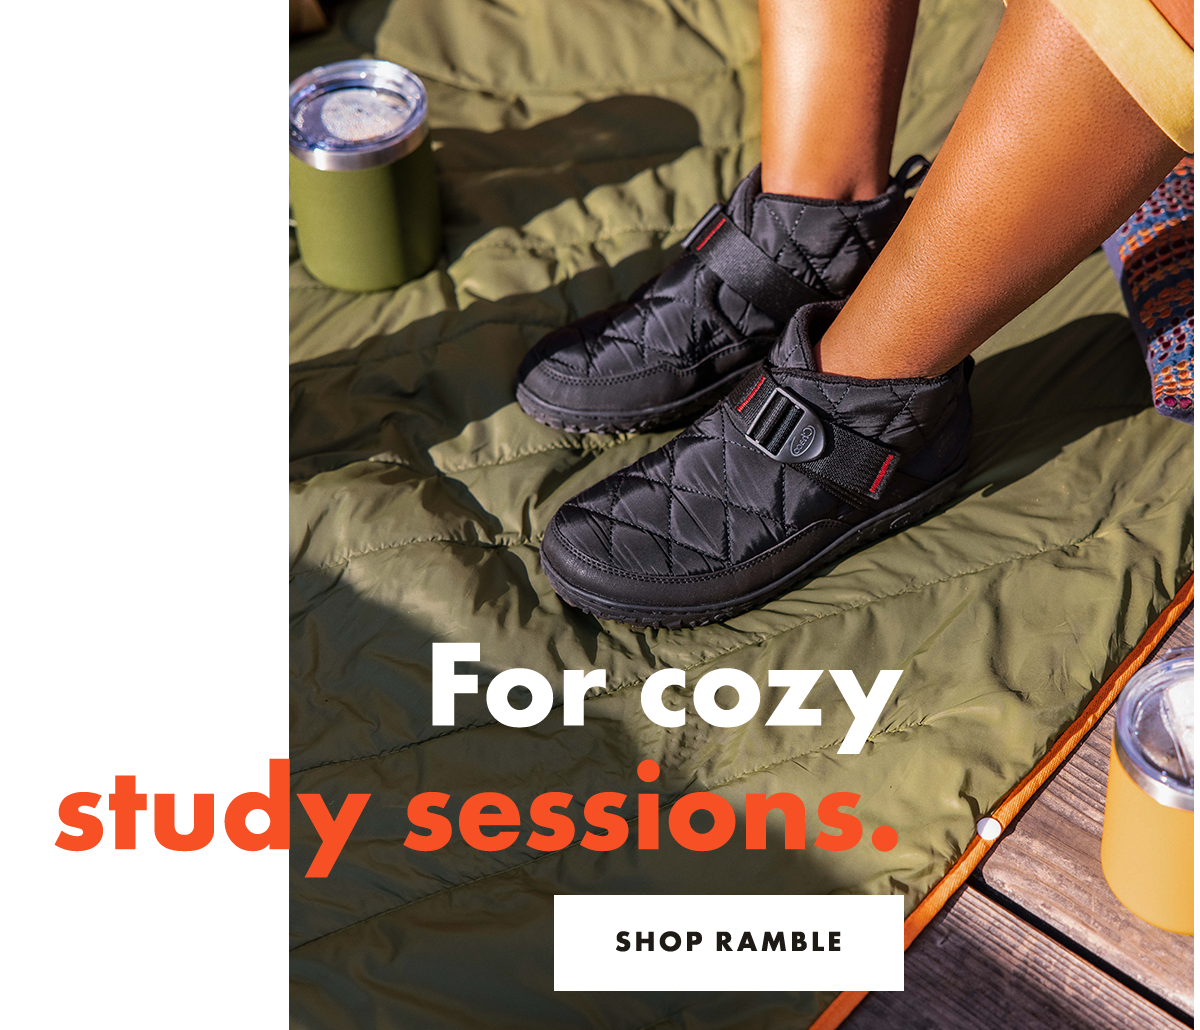 For cozy study sessions. SHOP RAMBLE